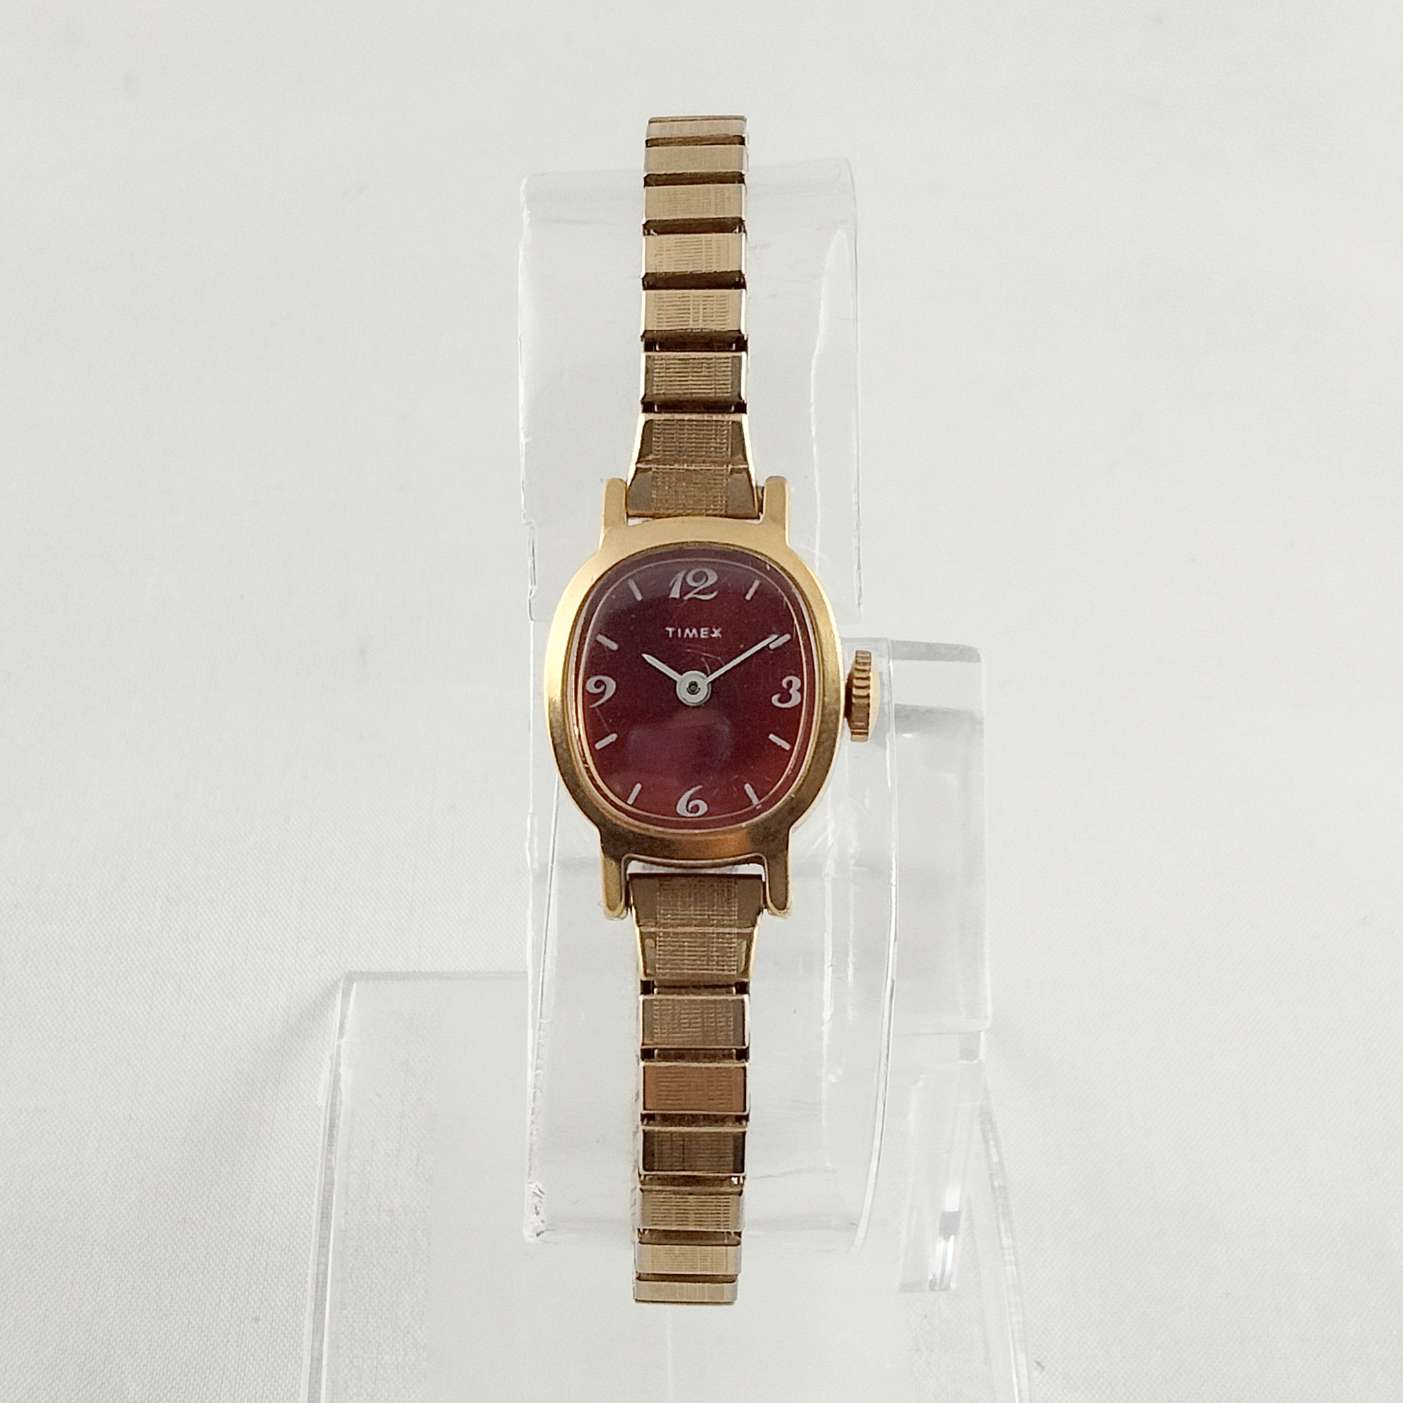 Timex Women's Gold Tone Watch, Red Dial, Stretch Strap